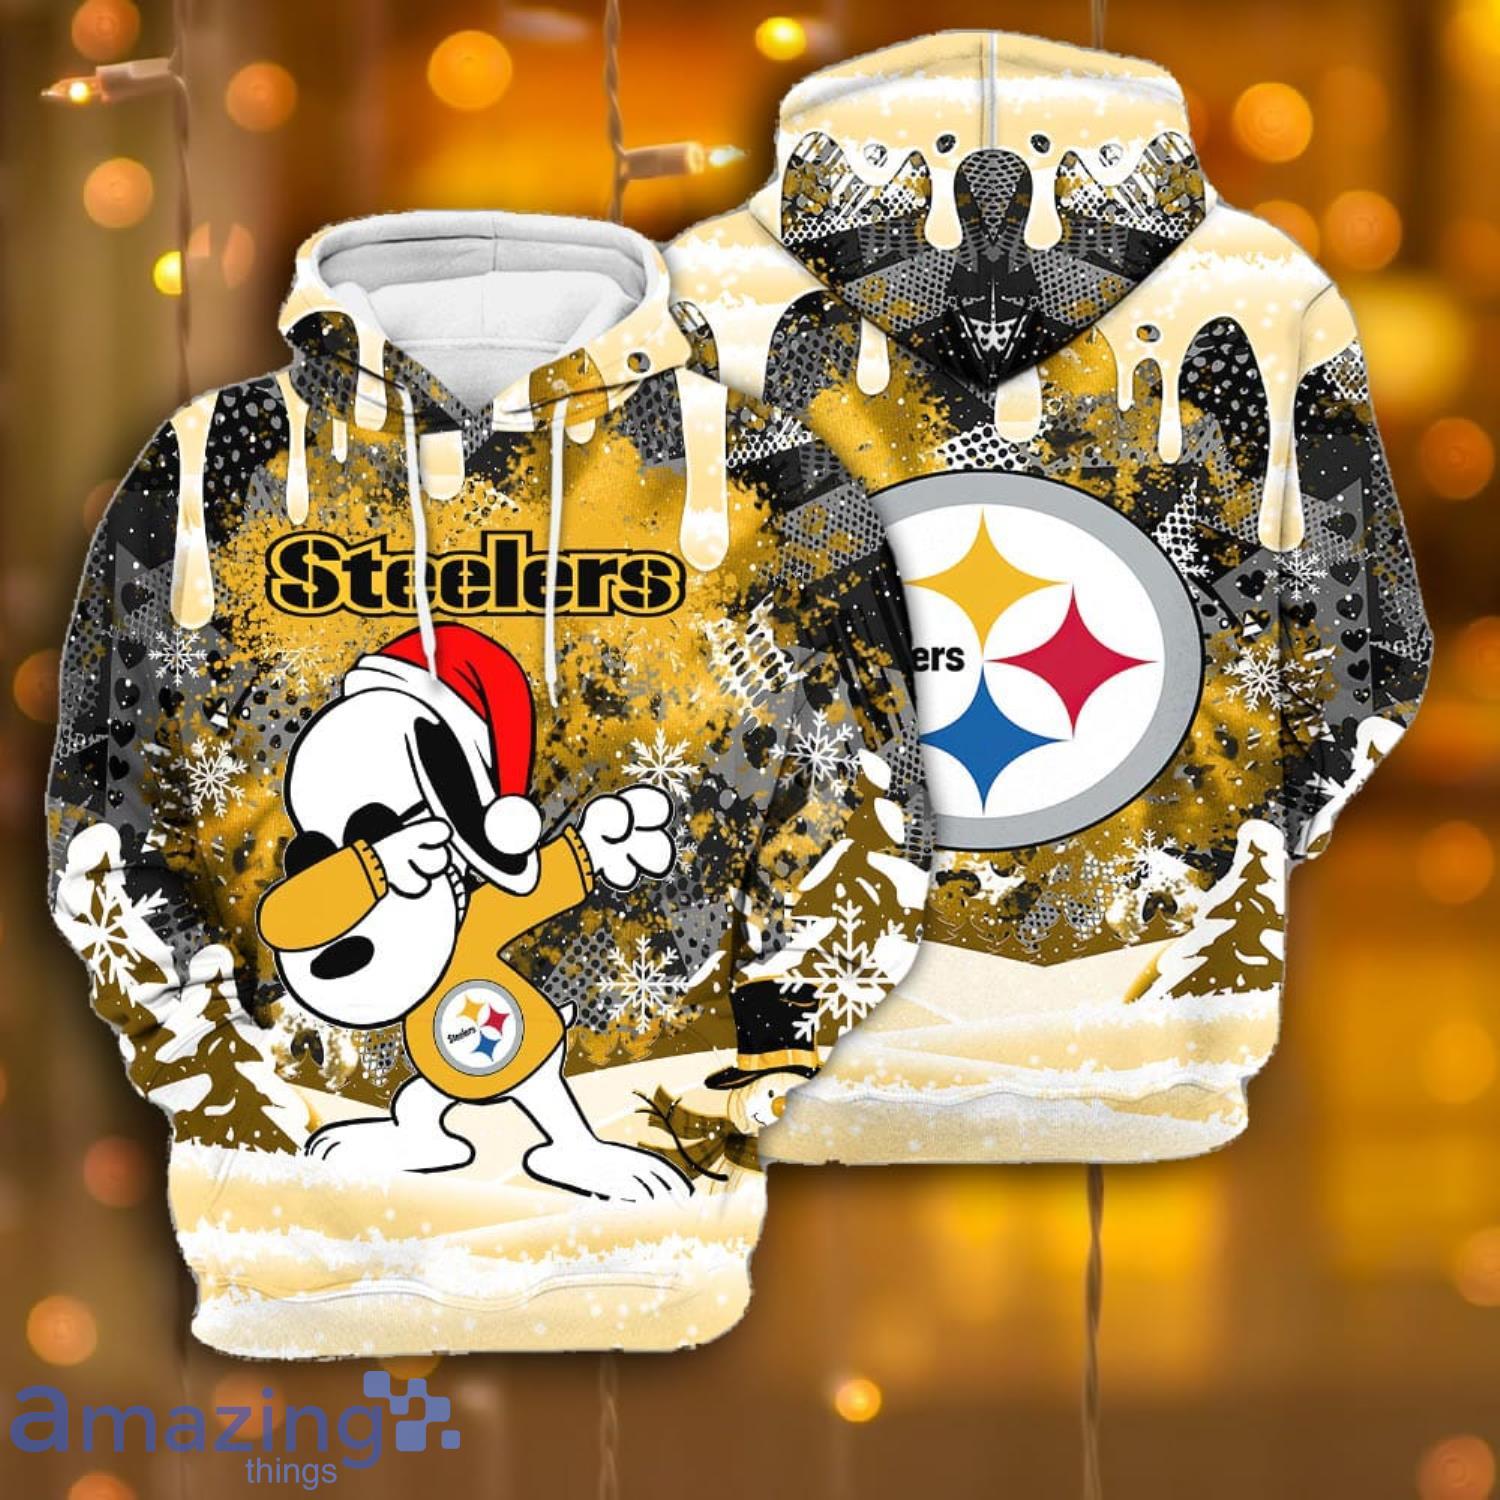 Pittsburgh Steelers Tshirt 3D Unique Steelers Gifts - Personalized Gifts:  Family, Sports, Occasions, Trending